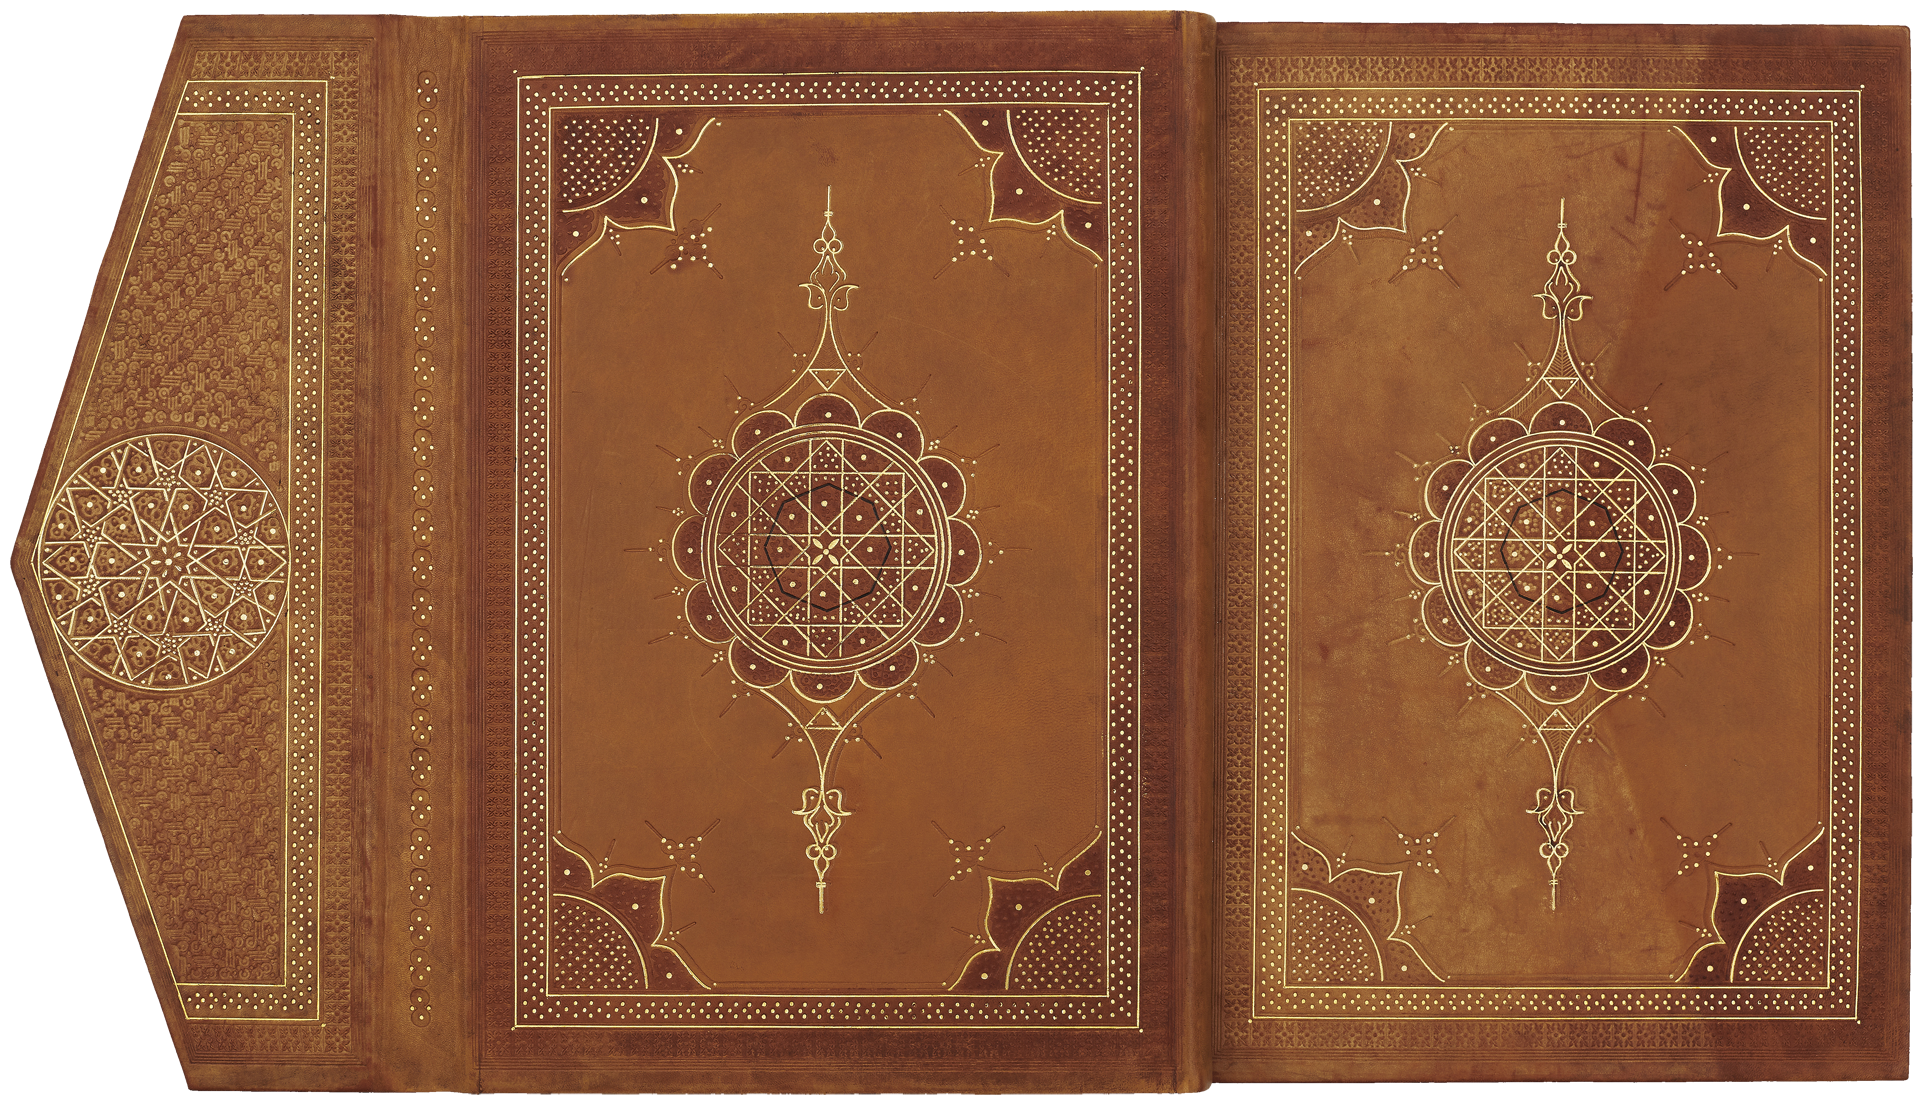 The intricately detailed flap and front and back covers of the Baybars Qur’an facsimile binding <small><a href="https://www.facsimile-editions.com/copyright/">Image © Copyright 2021 Facsimile Editions Ltd</a></small>